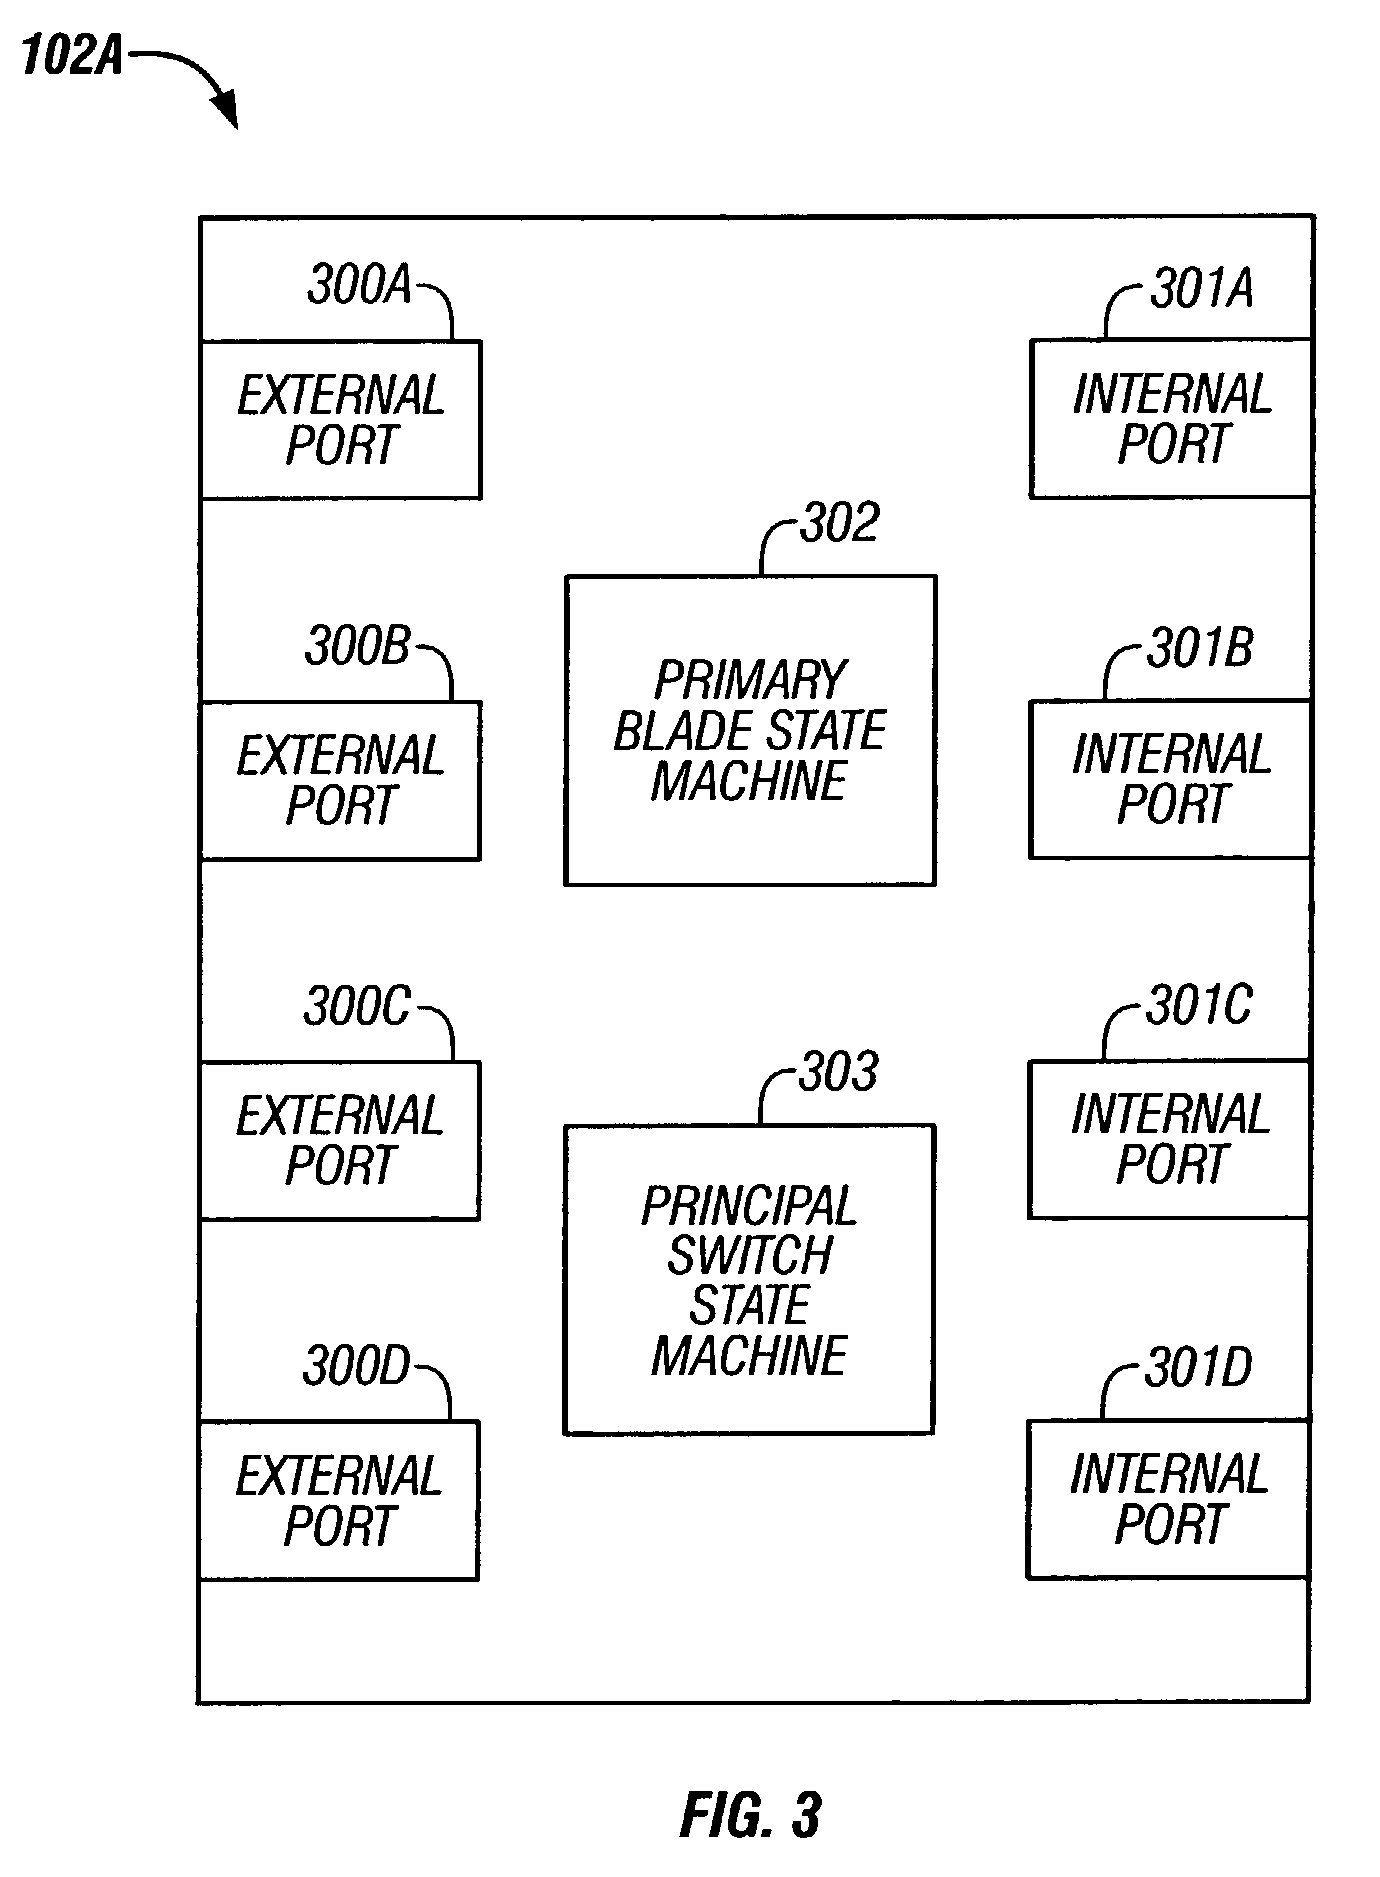 Method and system for dynamically assigning domain identification in a multi-module fibre channel switch